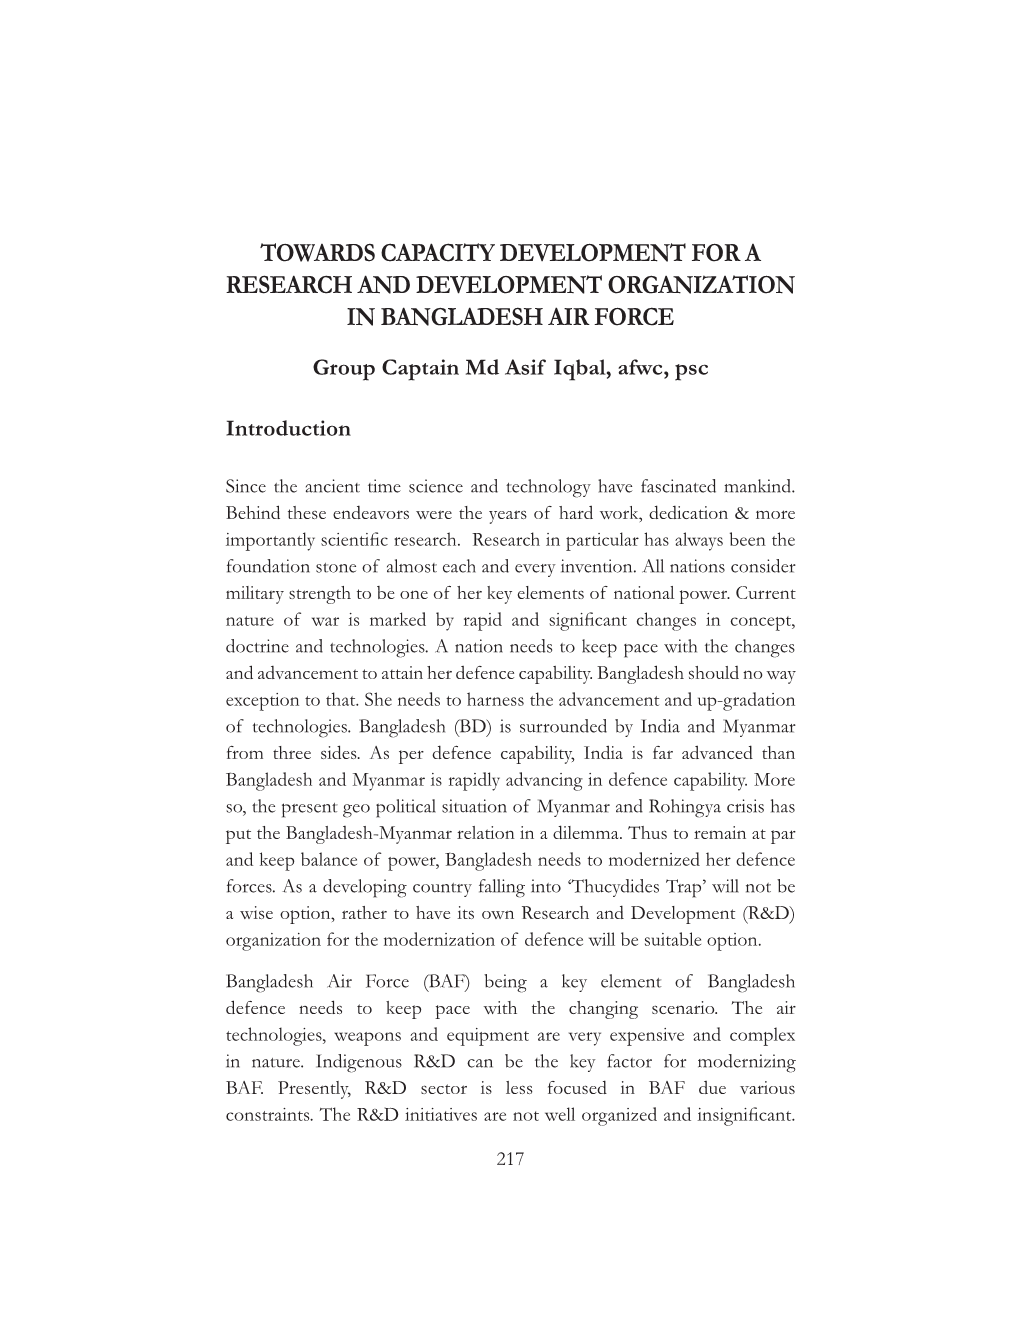 Towards Capacity Development for a Research and Development Organization in Bangladesh Air Force